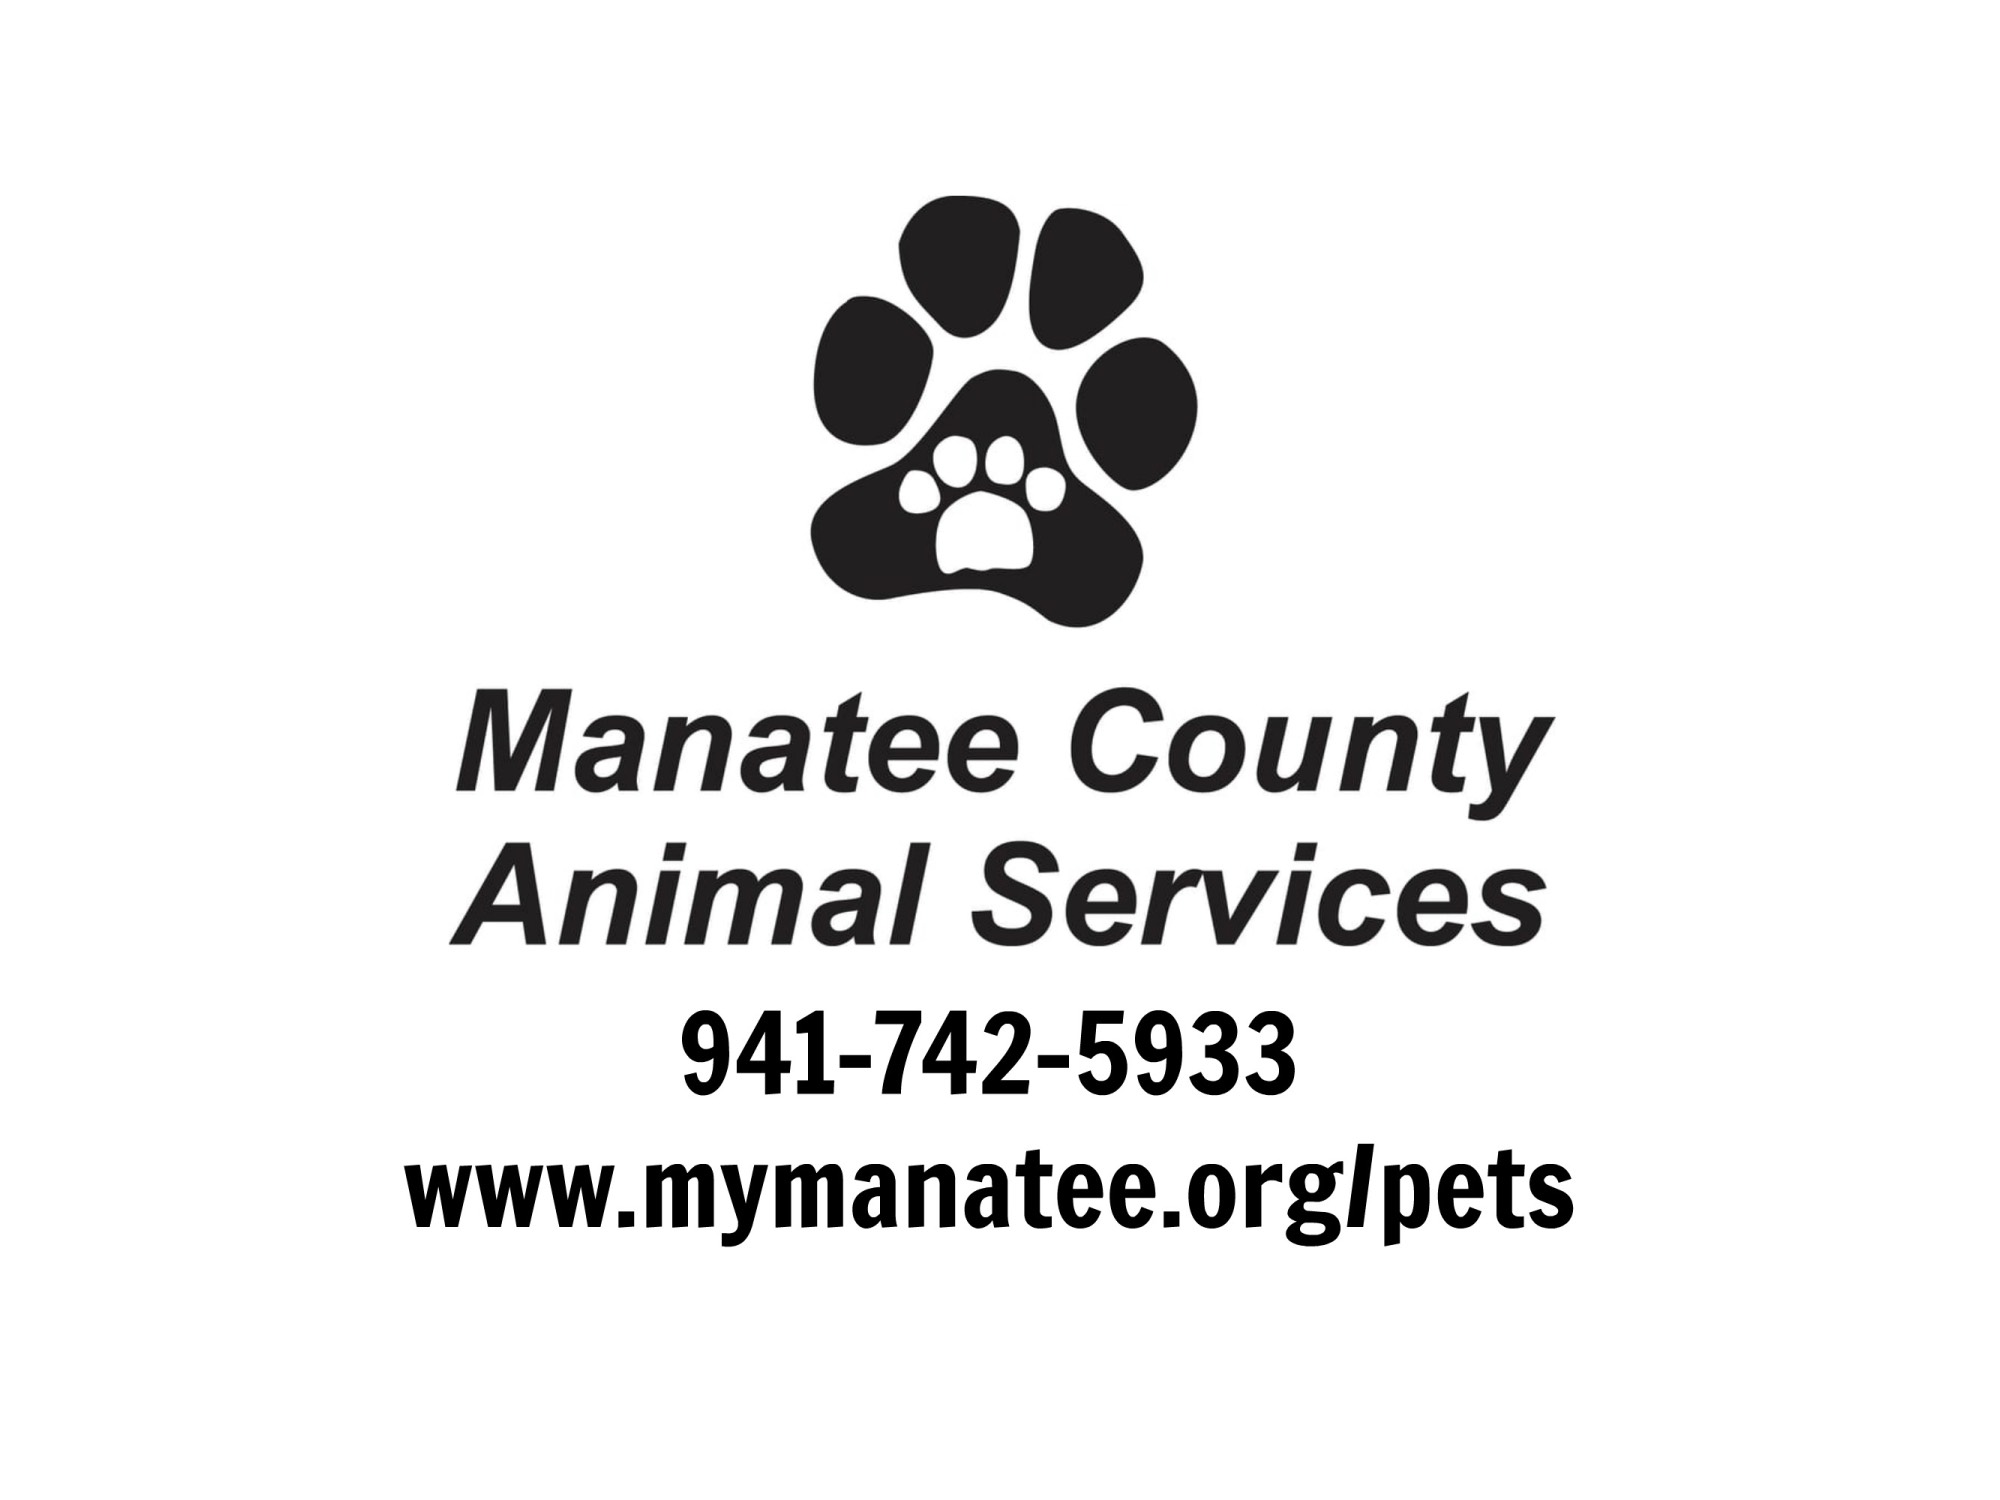 Manatee County Animal Services